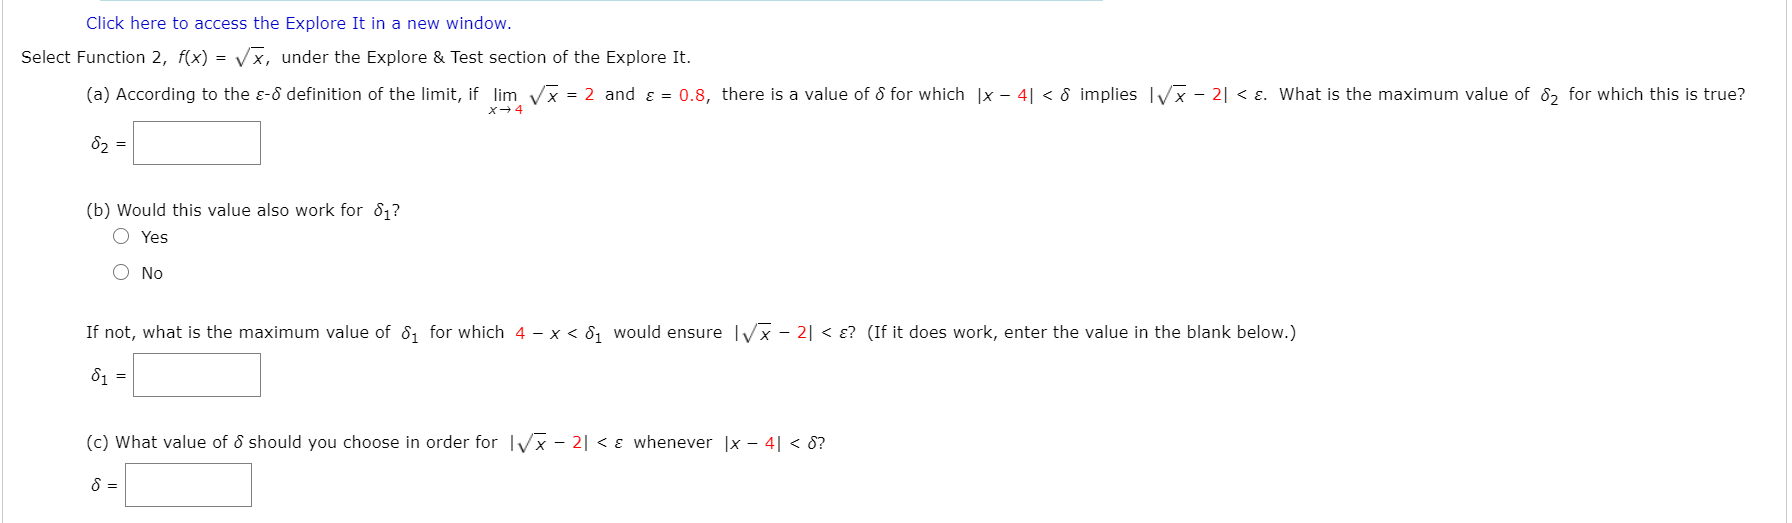 Select Function 2, f(x) = Vx, under the Explore & Test section of the Explore It.
(a) According to the e-8 definition of the limit, if lim Vx = 2 and ɛ = 0.8, there is a value of 8 for which |x – 4| < 8 implies Vx – 2| < ɛ. What is the maximum value of 8, for which this is true?
x-4
82 =
(b) Would this value also work for 81?
O Yes
O No
If not, what is the maximum value of 8, for which 4 - x < 8, would ensure Vx – 2| < ɛ? (If it does work, enter the value in the blank below.)
81 =
(c) What value of 8 should you choose in order for IVx - 2| < ɛ whenever |x – 4| < 8?
8 =
